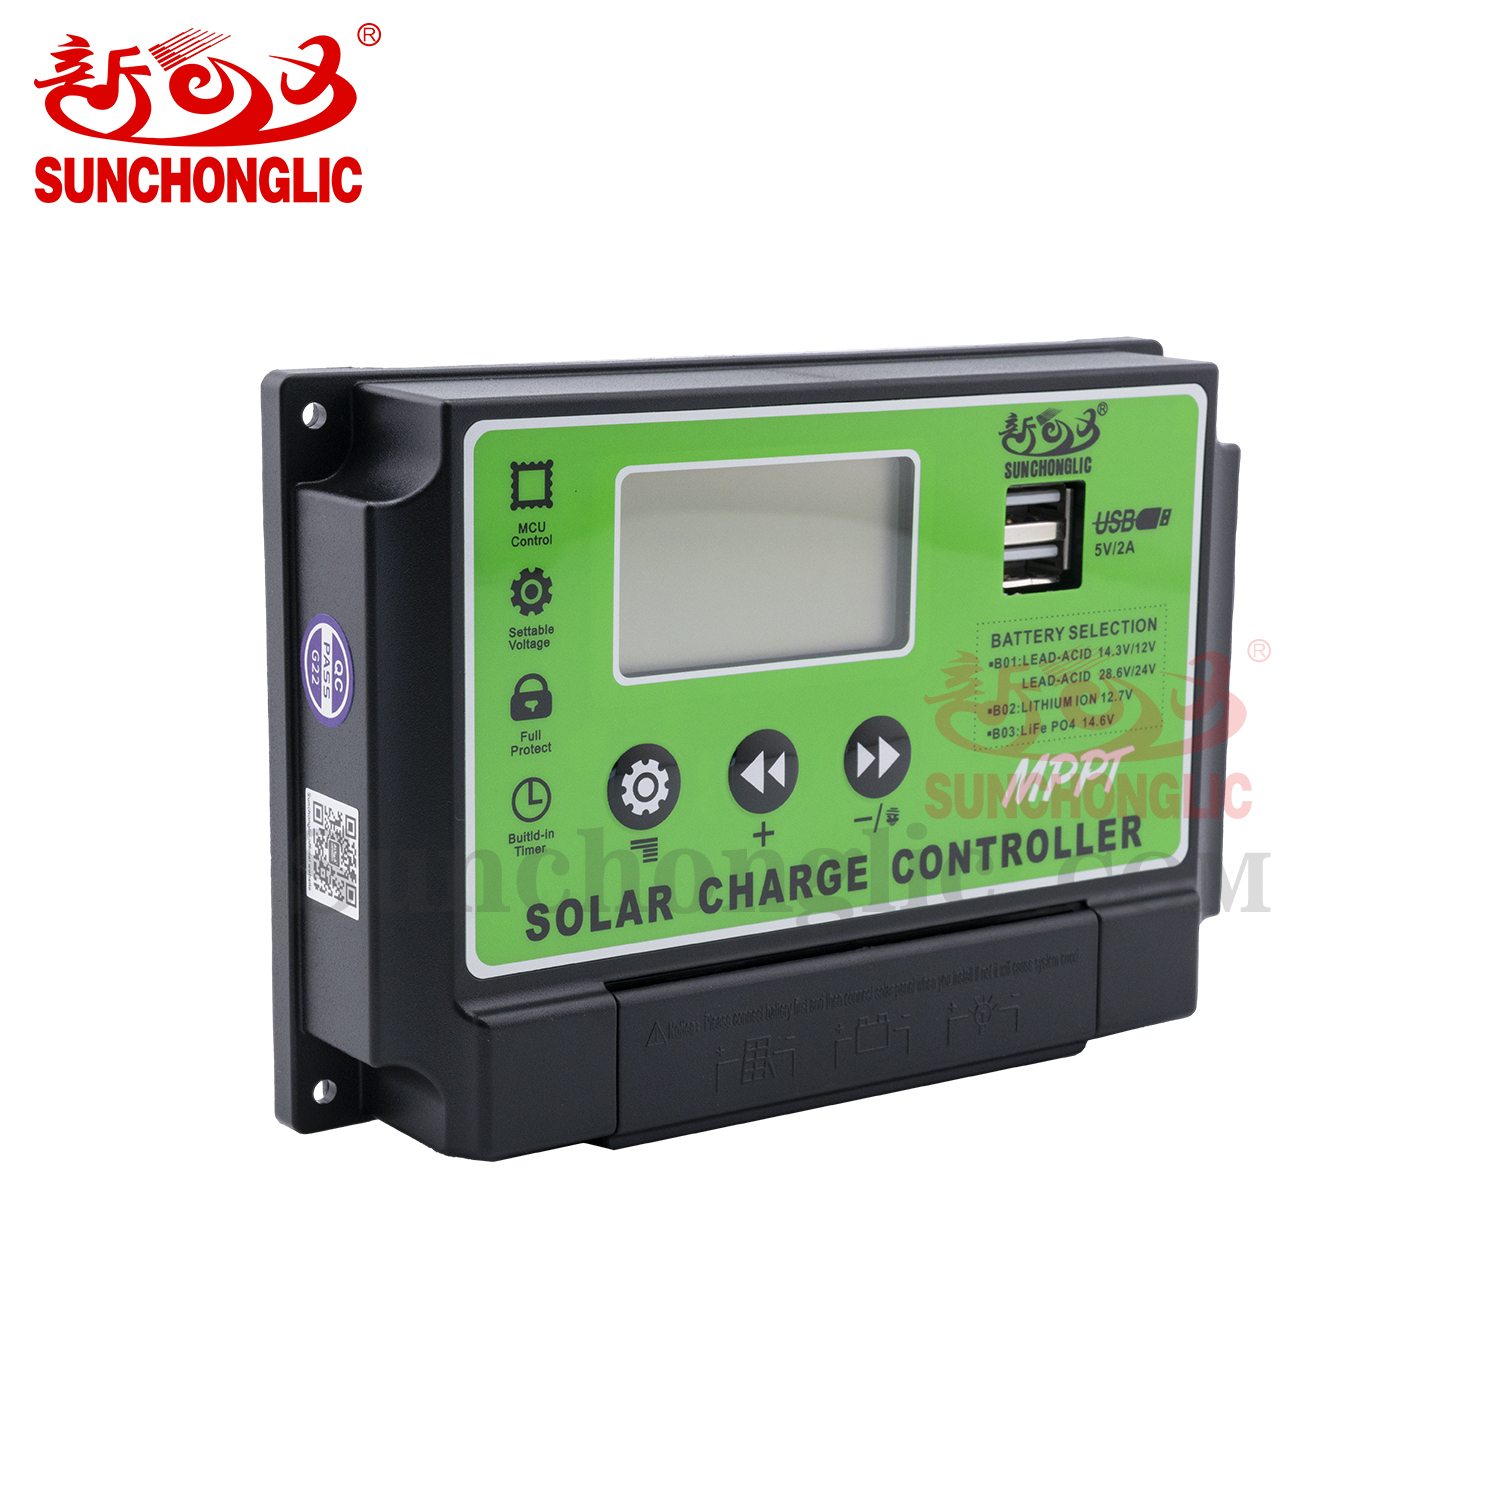 MPPT Solar Charge Controller - FT-M1240